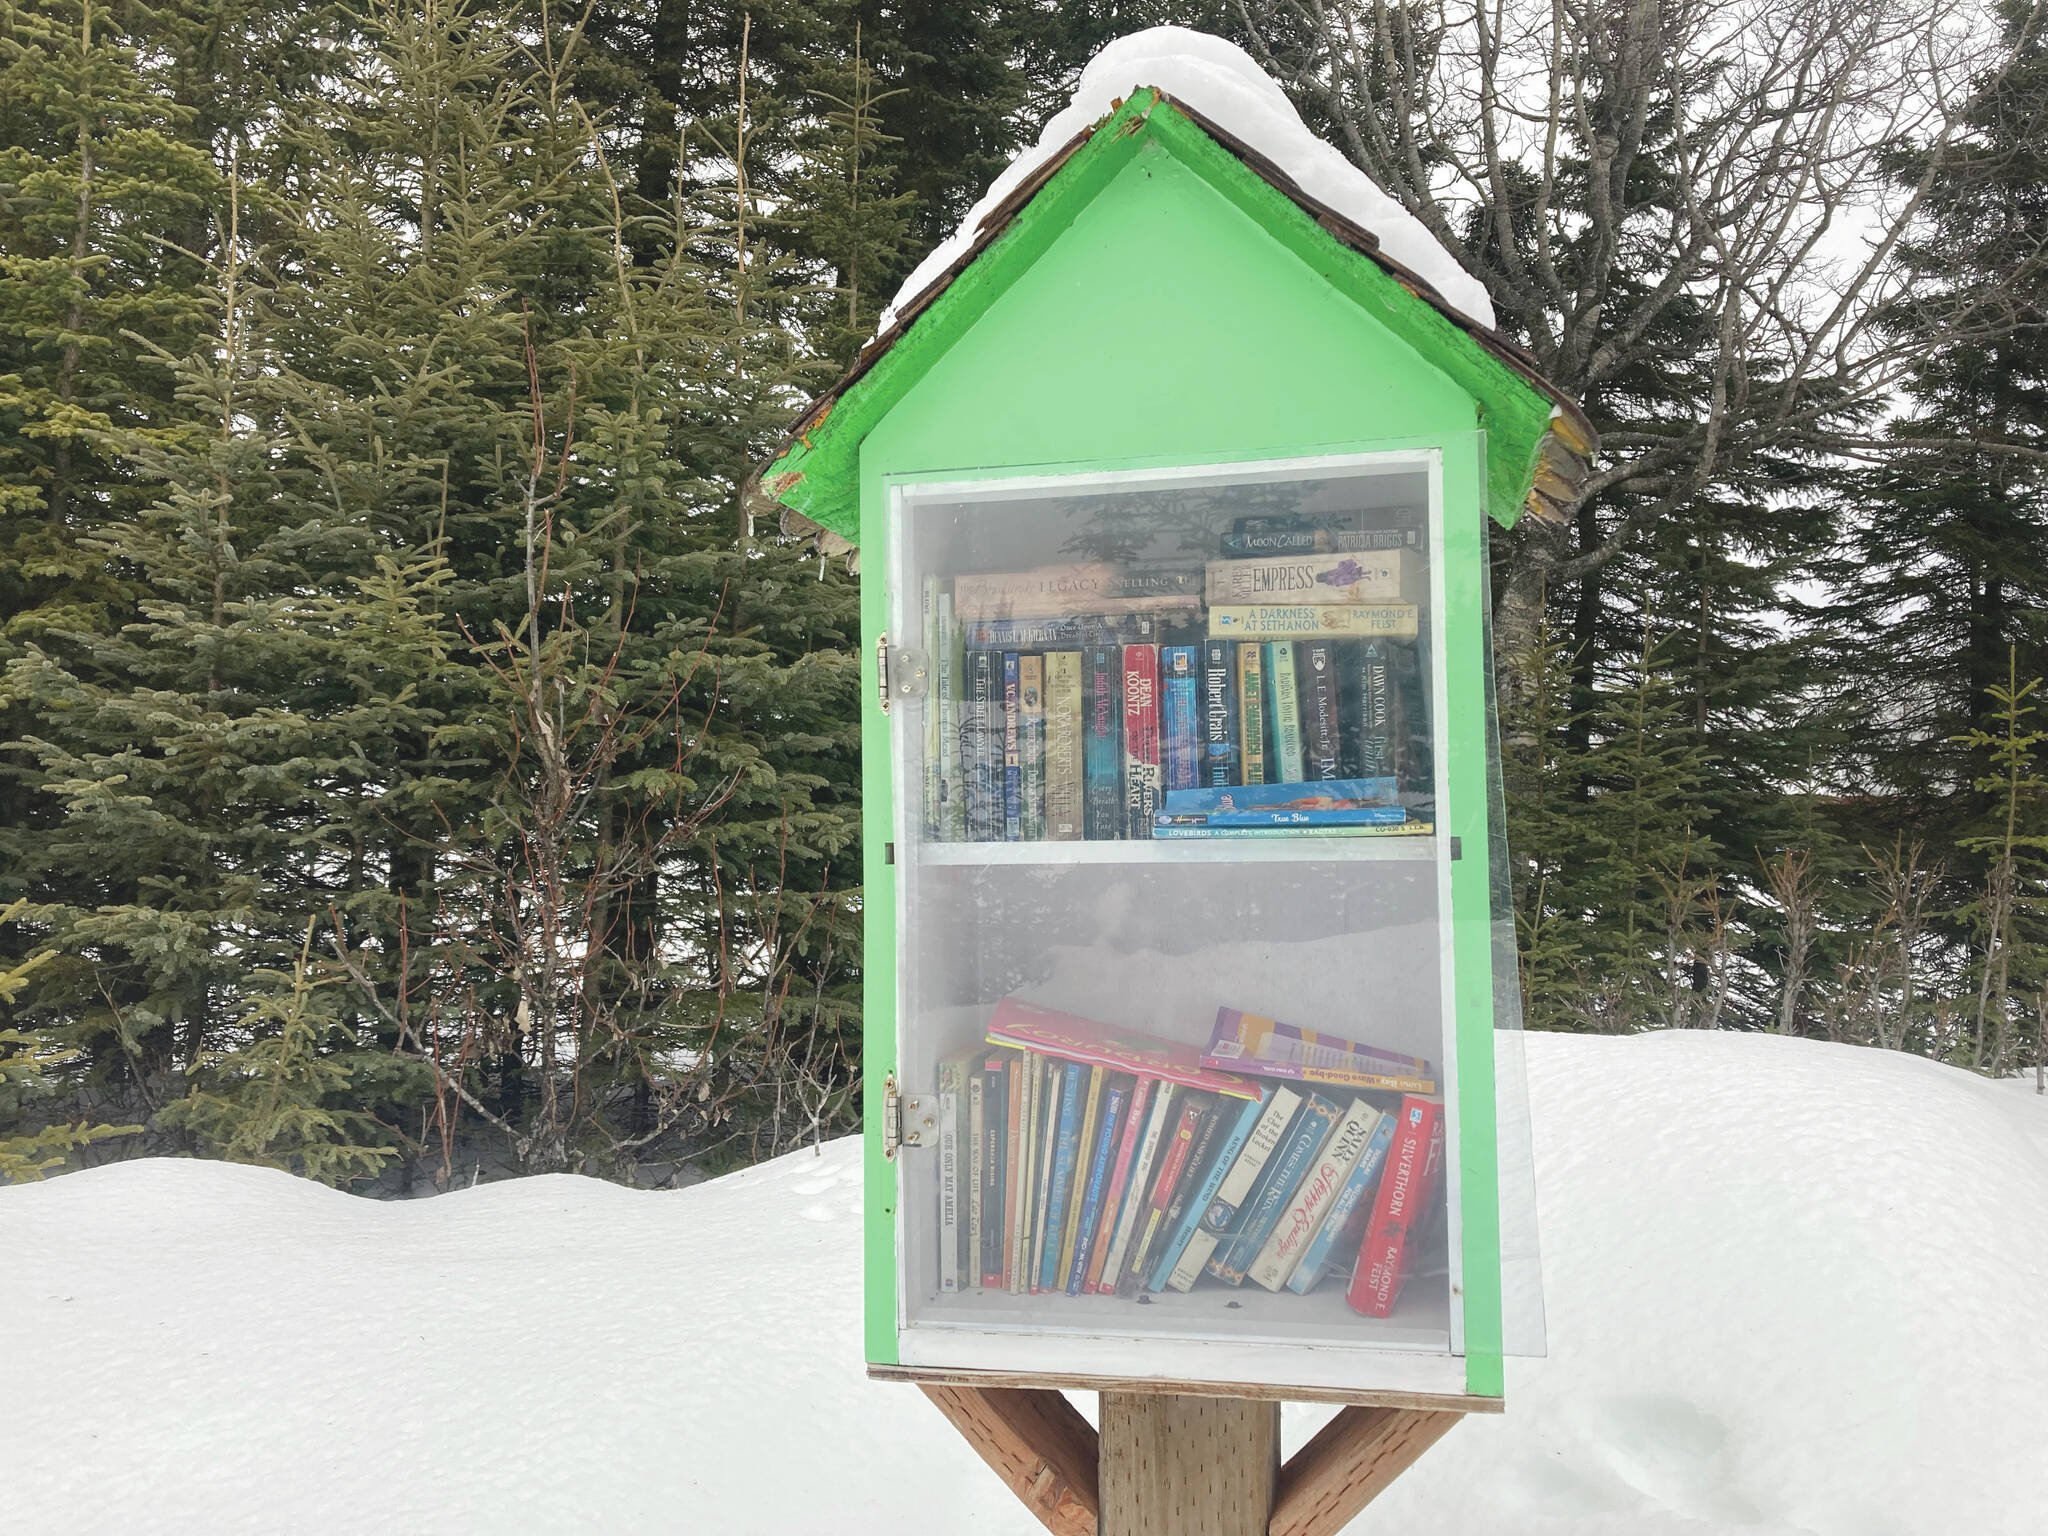 Jeff Helminiak / Peninsula Clarion
A green Little Free Library stands at the edge of Daubenspeck Family Park on Wednesday in Kenai.